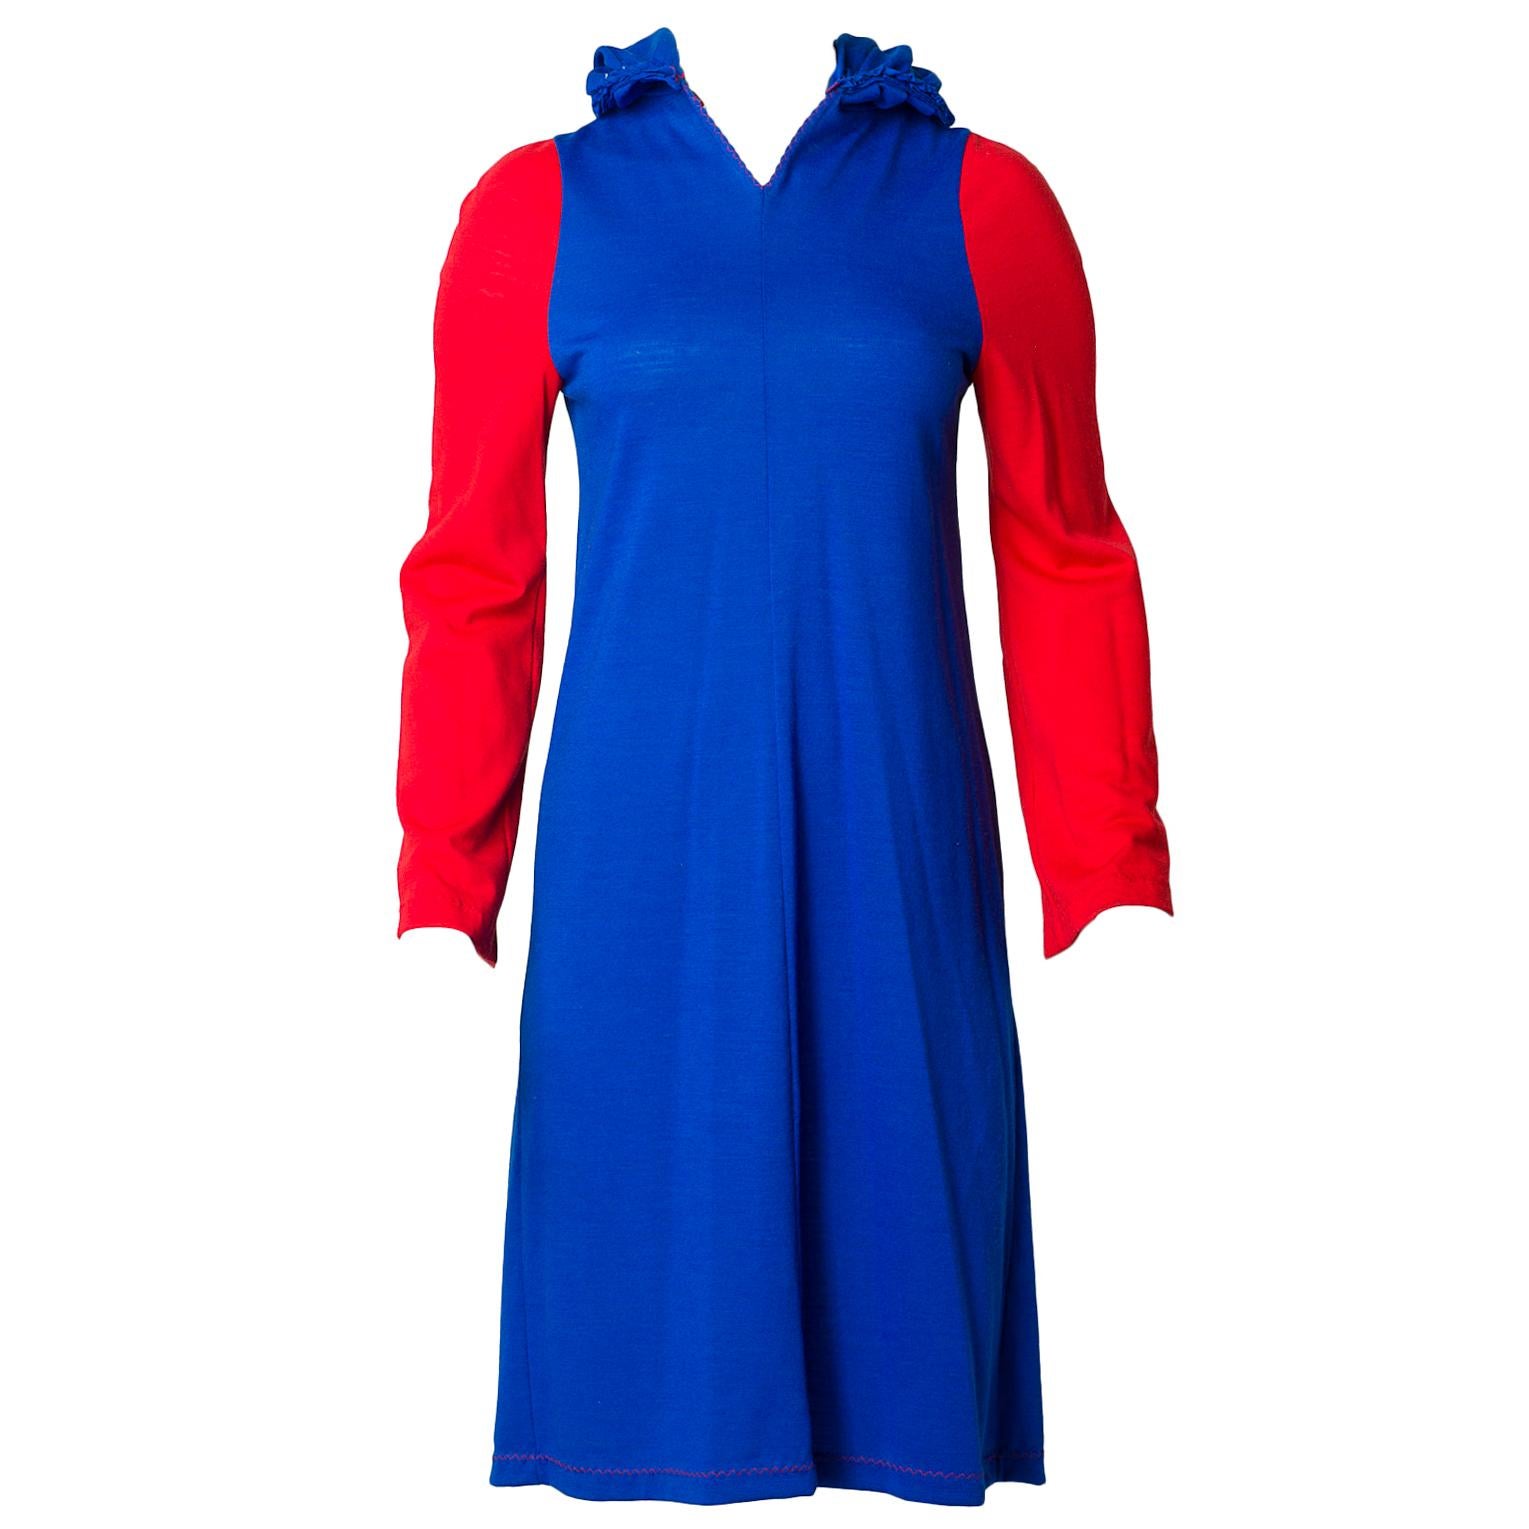 Stephen Burrows Colorblock Knit Dress with Hood